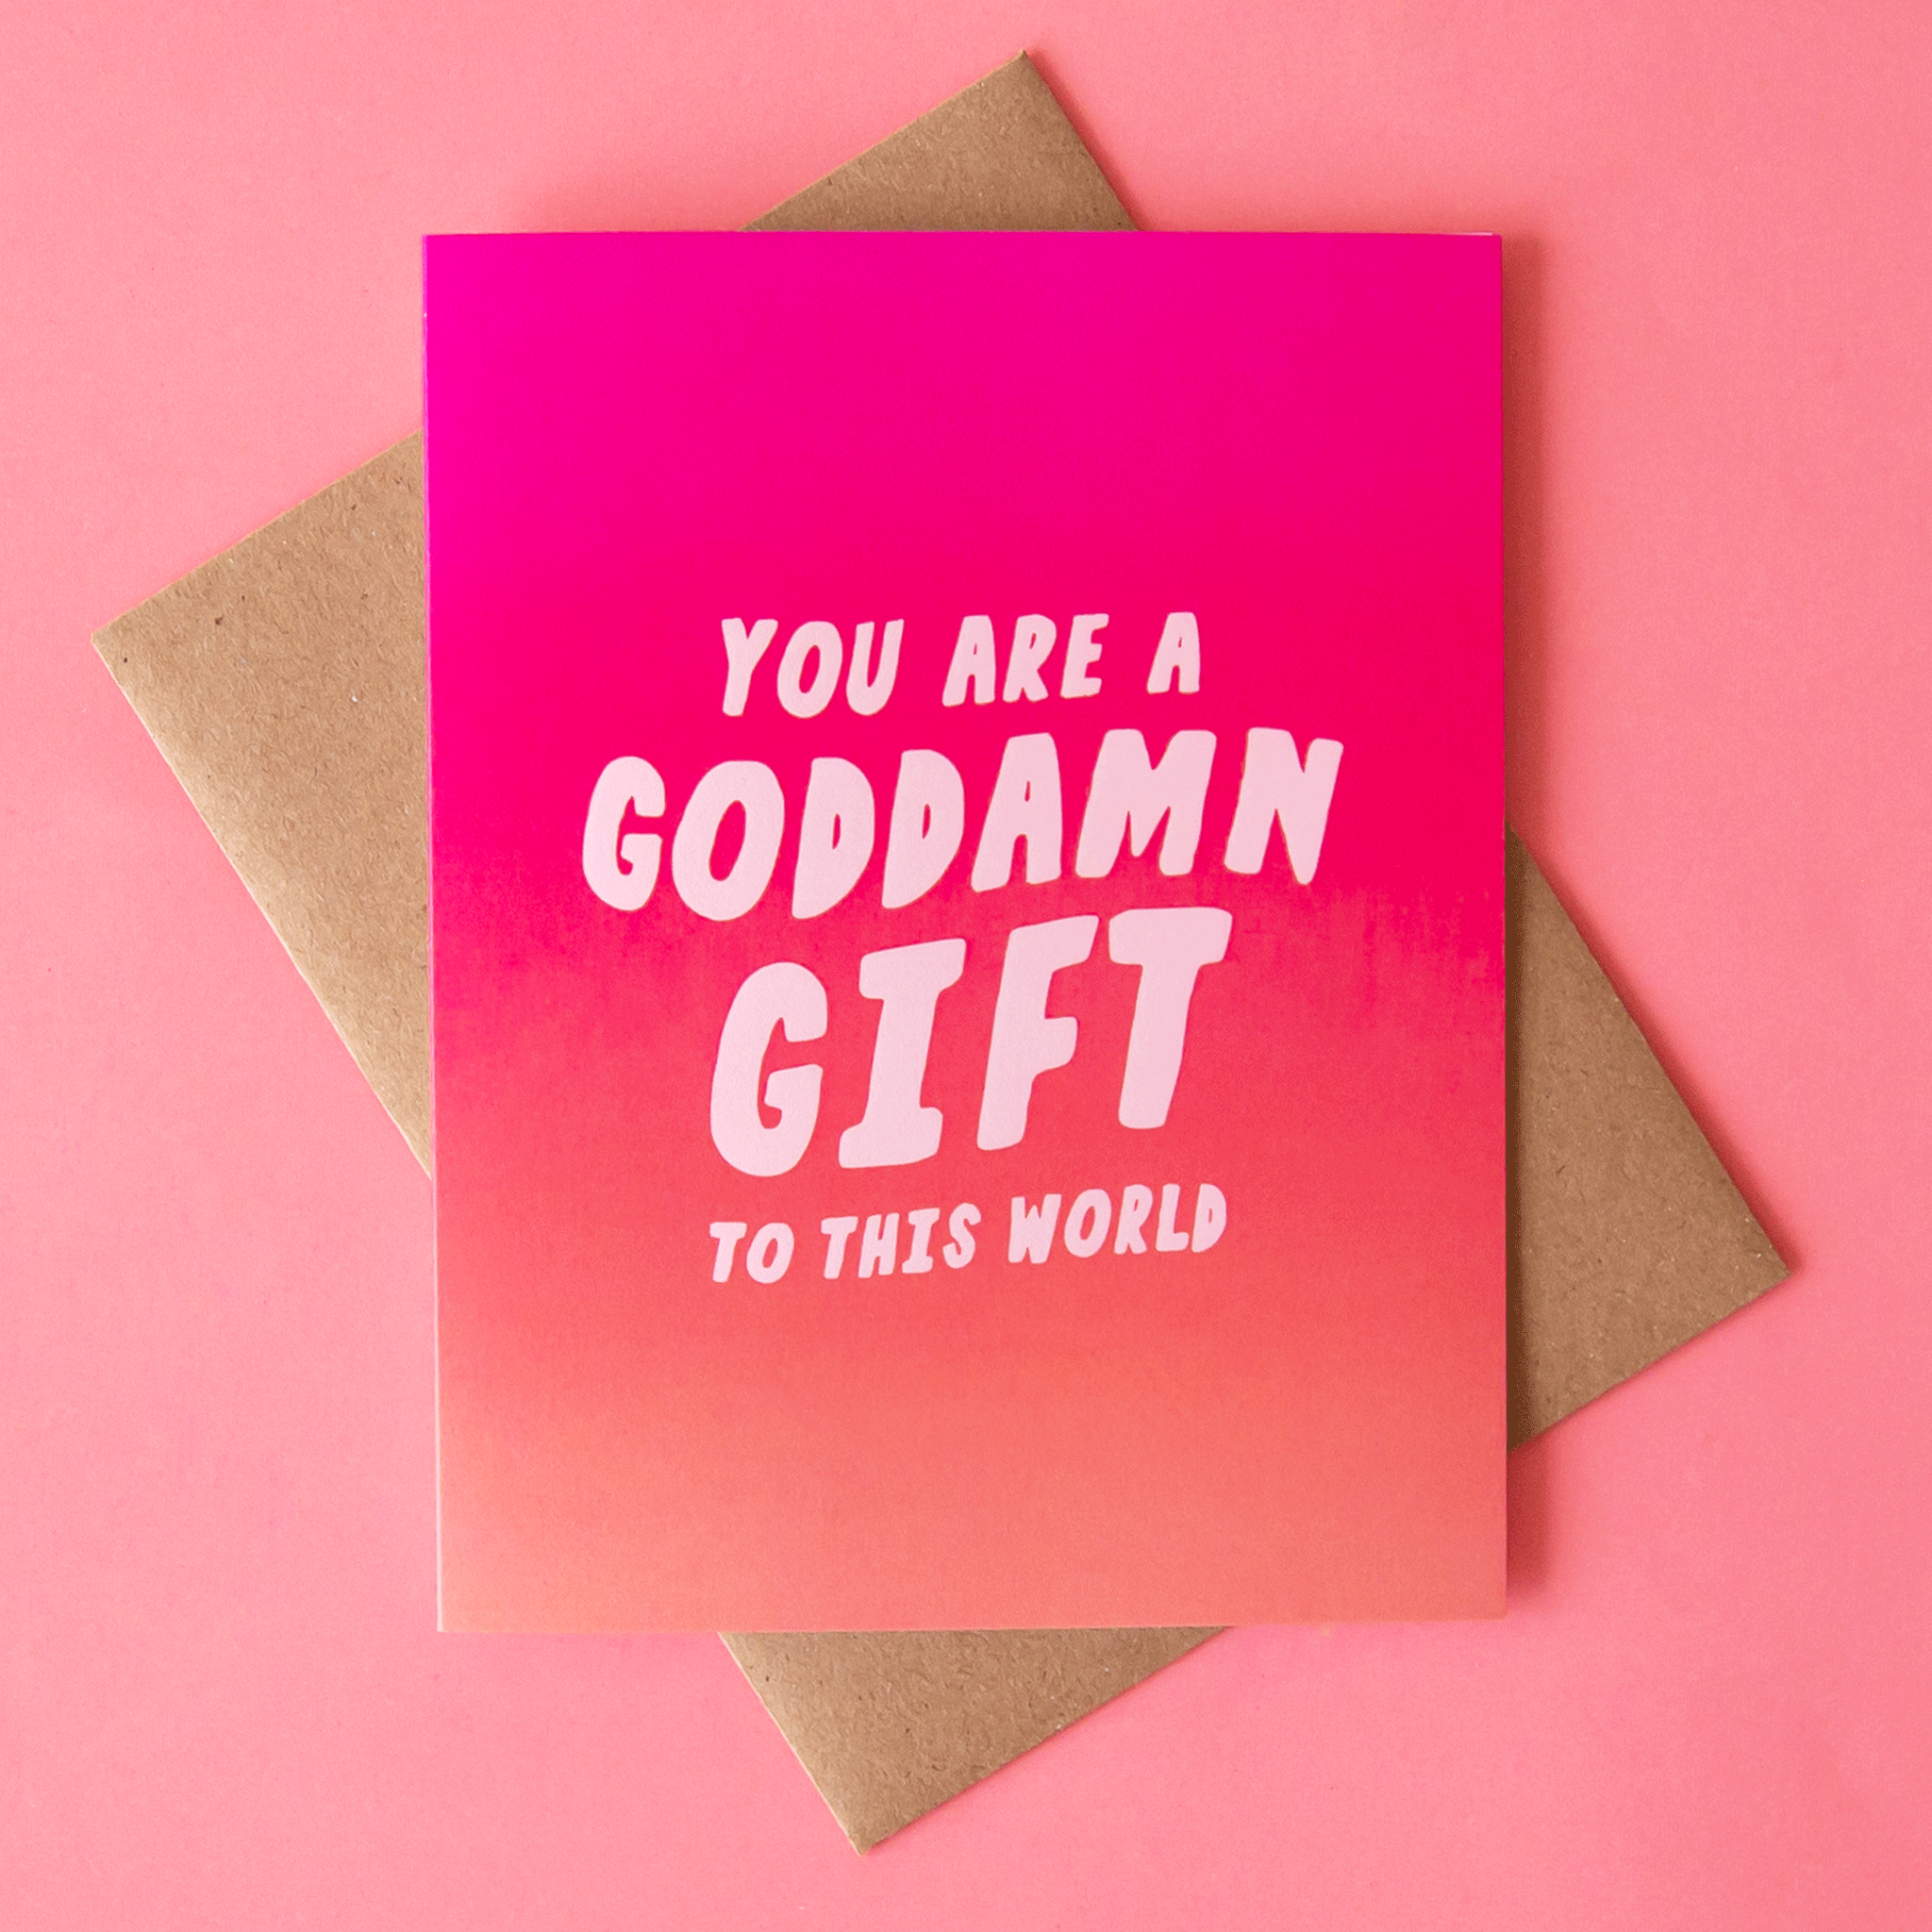 This card reads 'You Are a Goddamn Gift to This World' with a background featuring an ombre of rosie tones. This card is accompanied by a kraft brown envelope.